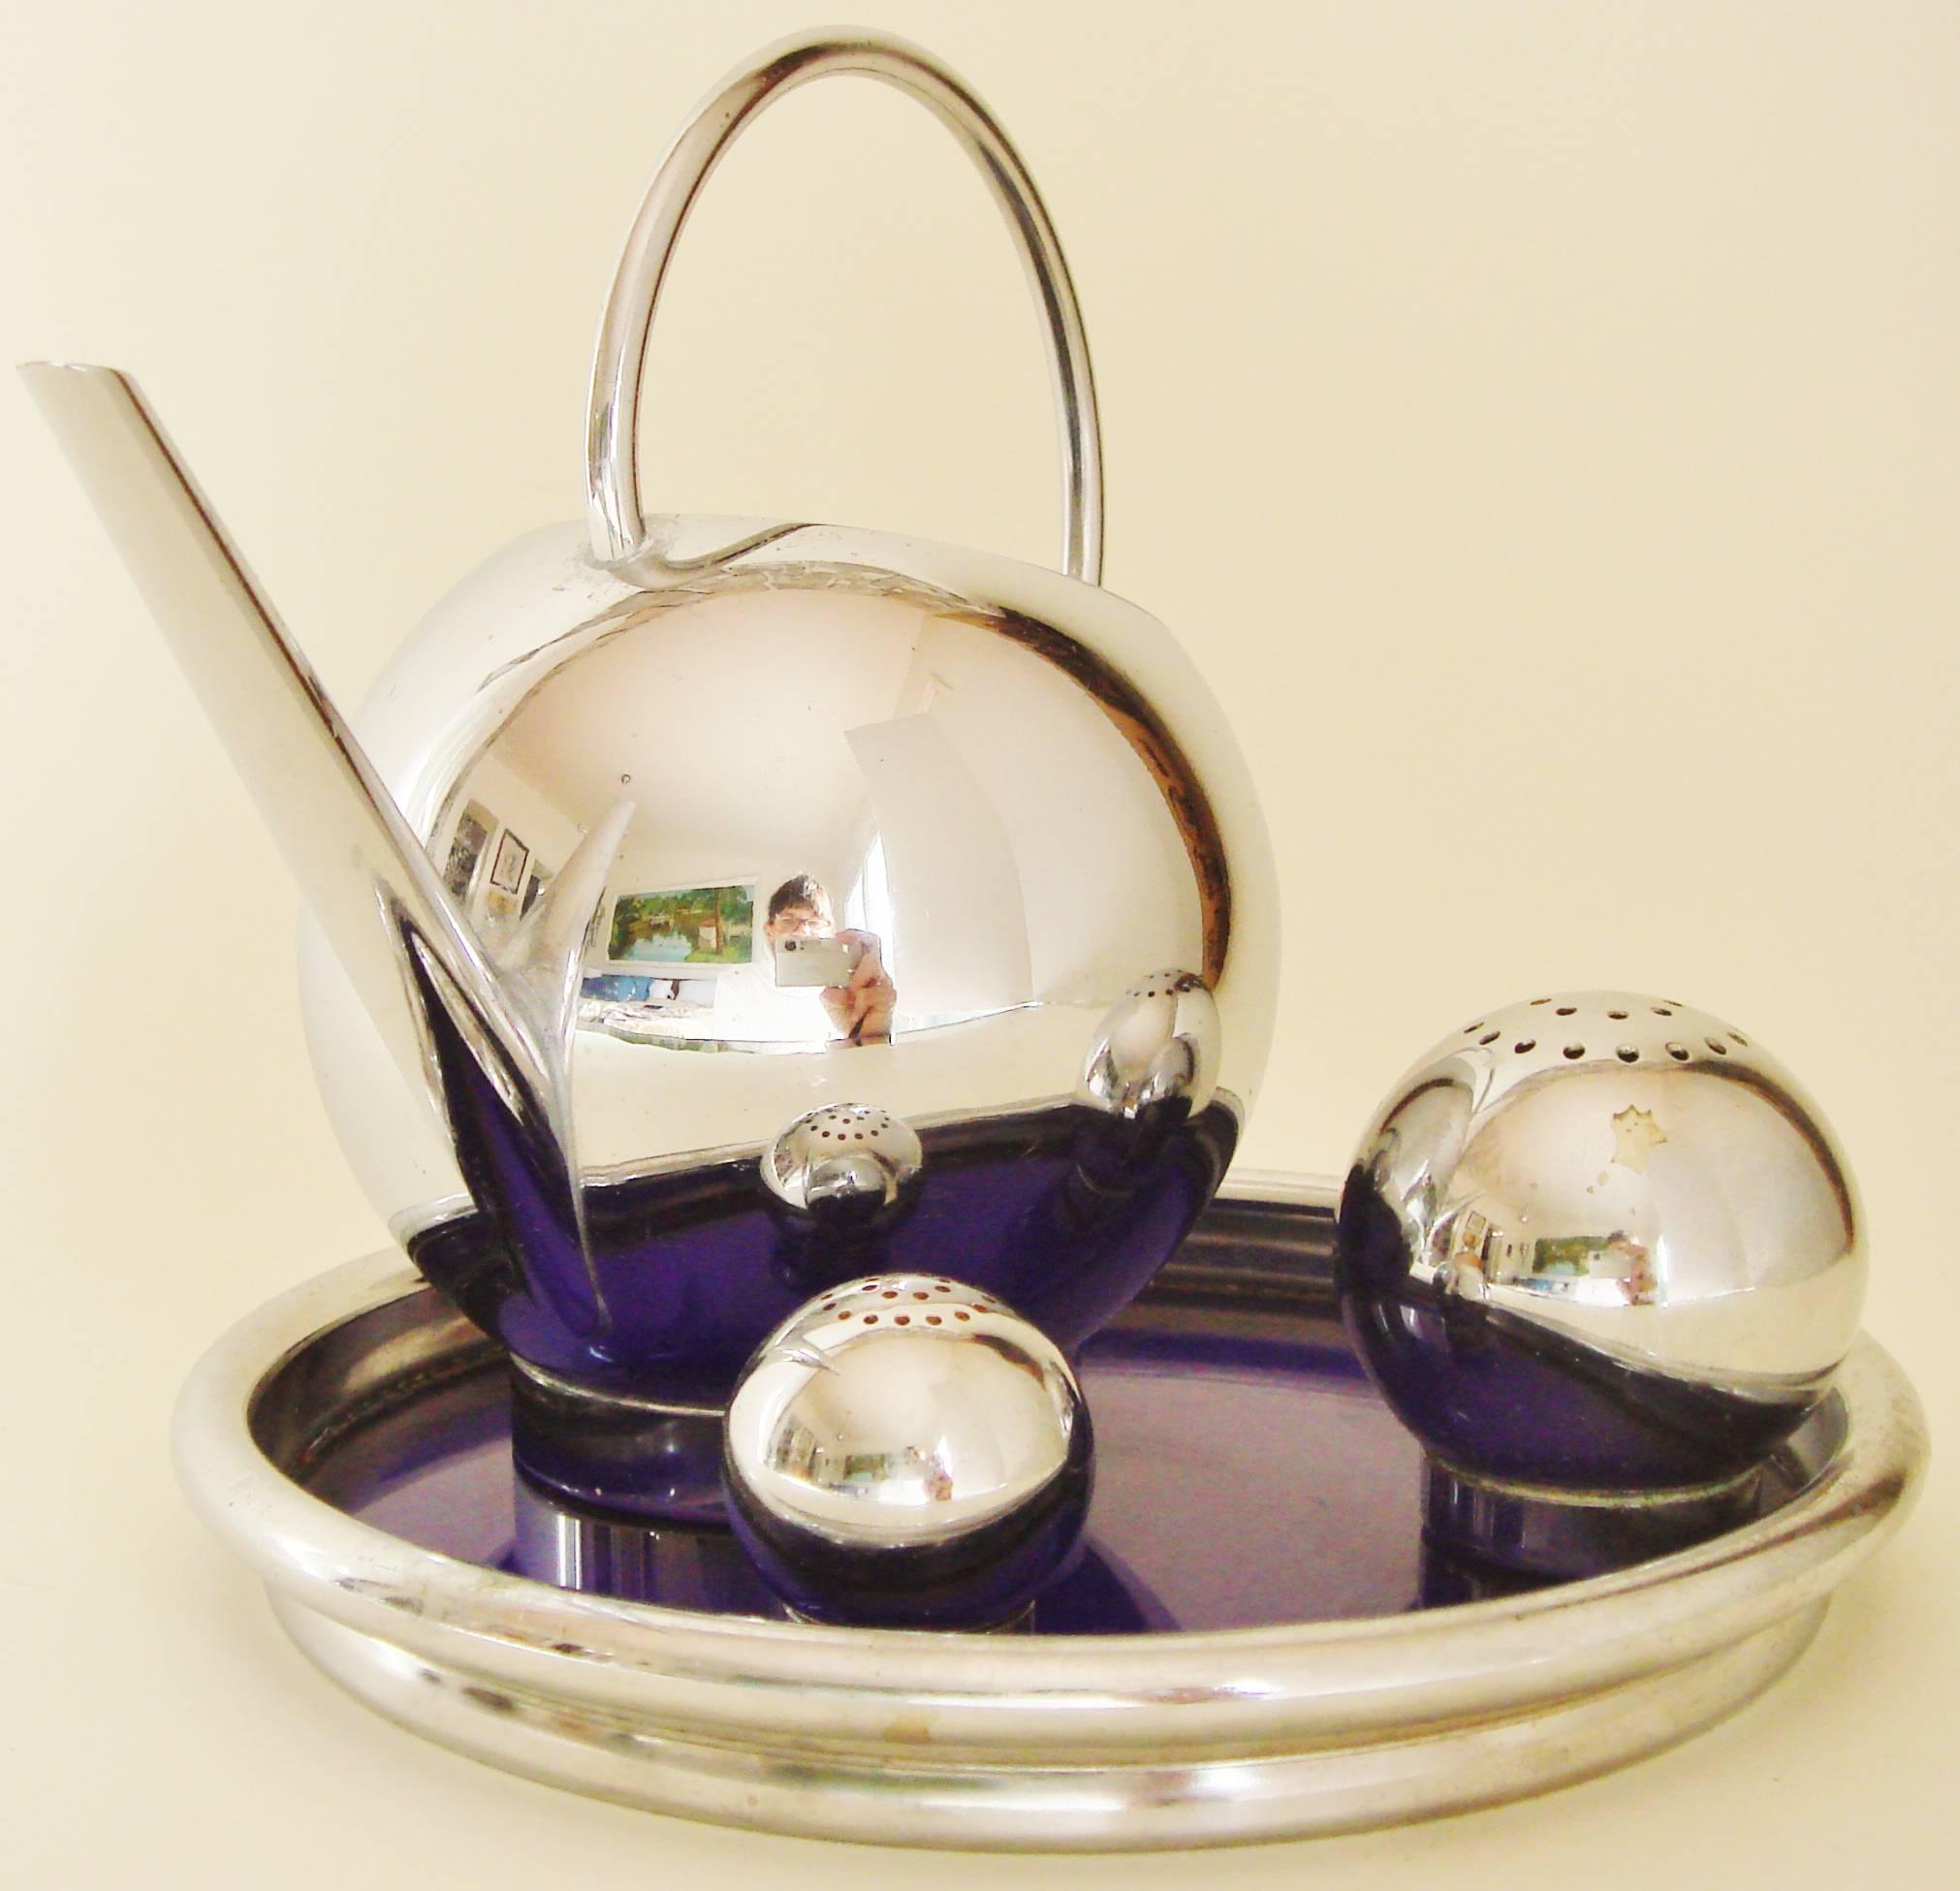 This beautifully designed American Art Deco 4-piece set, with its chrome and cobalt blue glass coaster tray, salt and pepper spheres and maple syrup/melted butter pitcher, was designed for use with either pancakes or corn. Number 28003 in the 1935